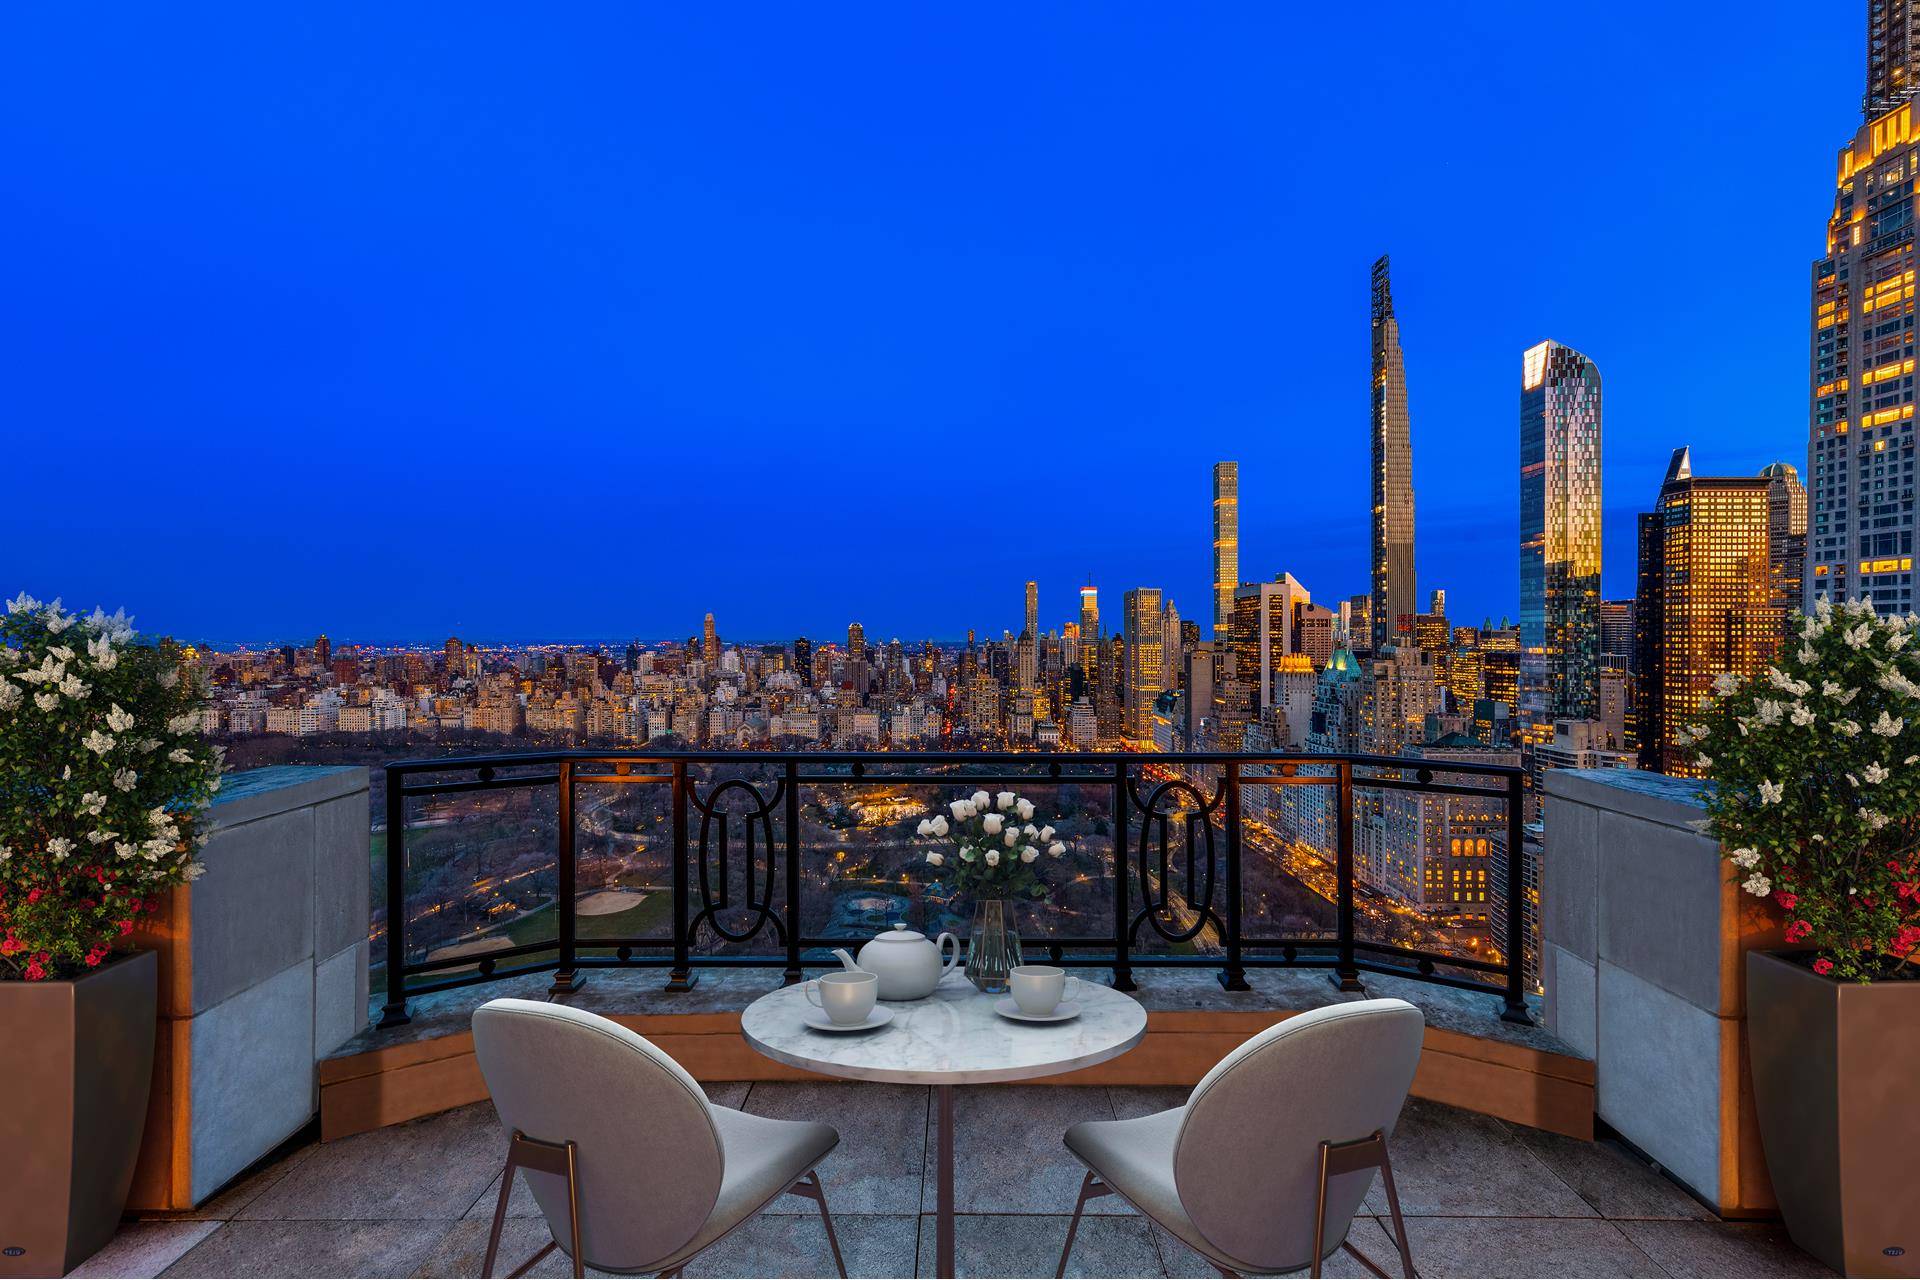 THE CROWN PENTHOUSE IN THE MOST ICONIC RESIDENTIAL BUILDING IN THE WORLD Stunning private terrace overlooking Central Park The Crown Penthouse at 15 Central Park West, distinguished as one of ...